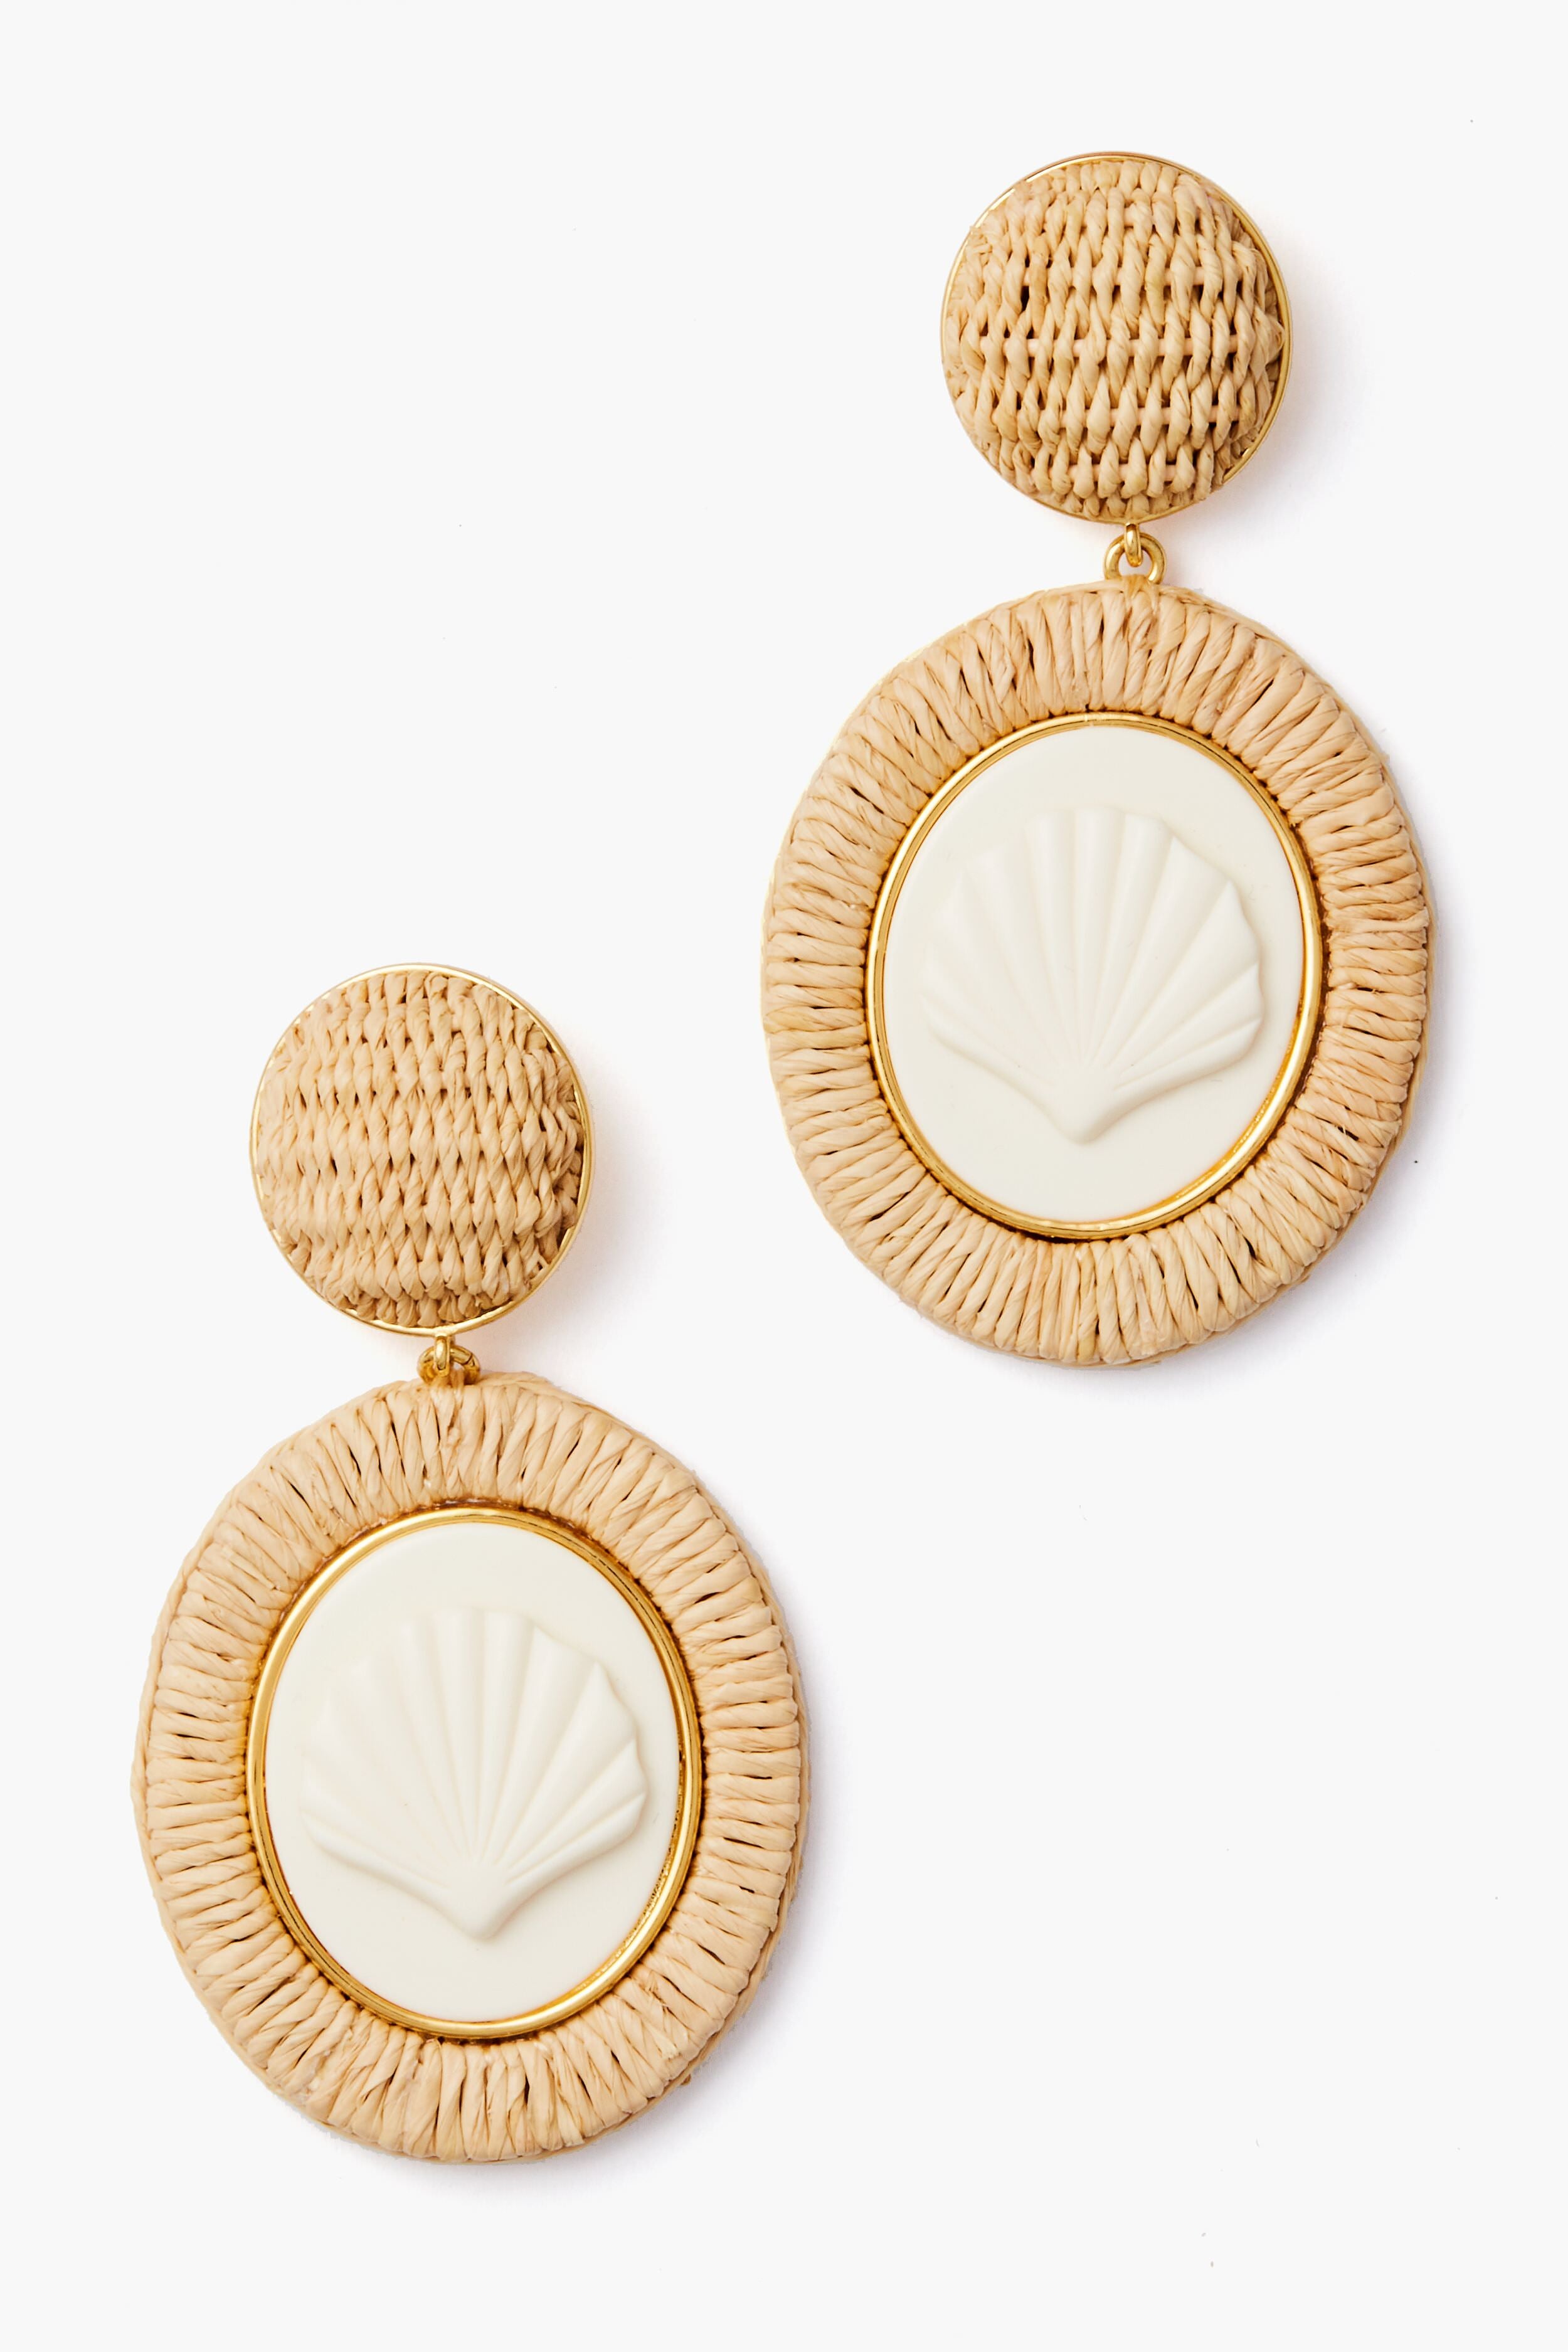 Raffia is having a major moment - take note with these stylish